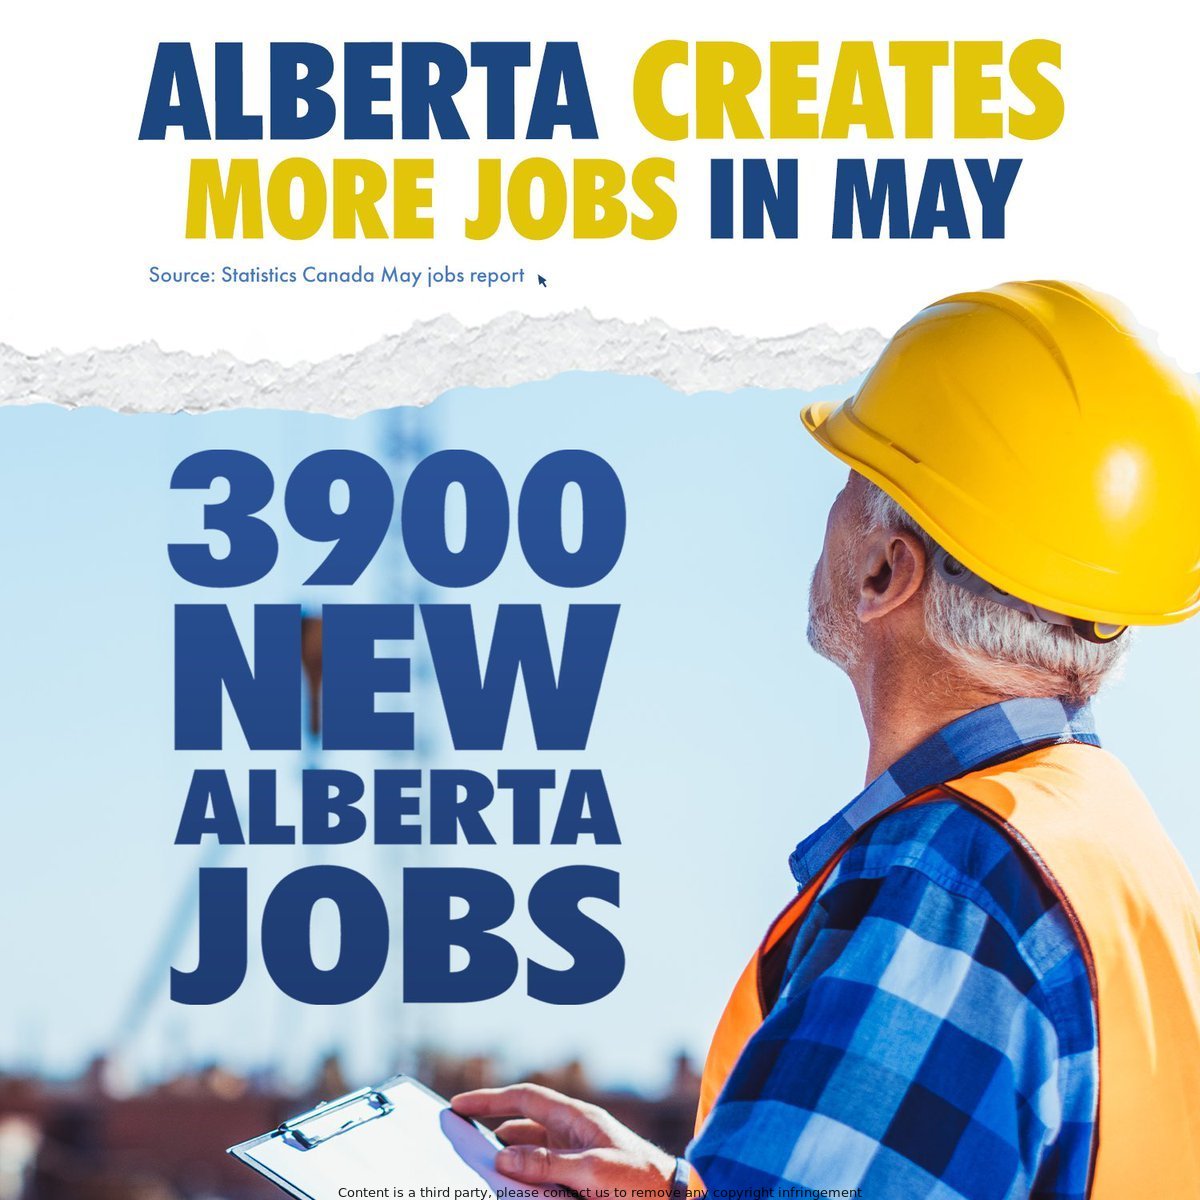 Great news for Alberta's economy, as new jobs are created according to the latest Statistics Canada survey. #StatisticsCanada #AlbertaJobs
Use my Temu code please ➡️186213261⬅️
code for code!